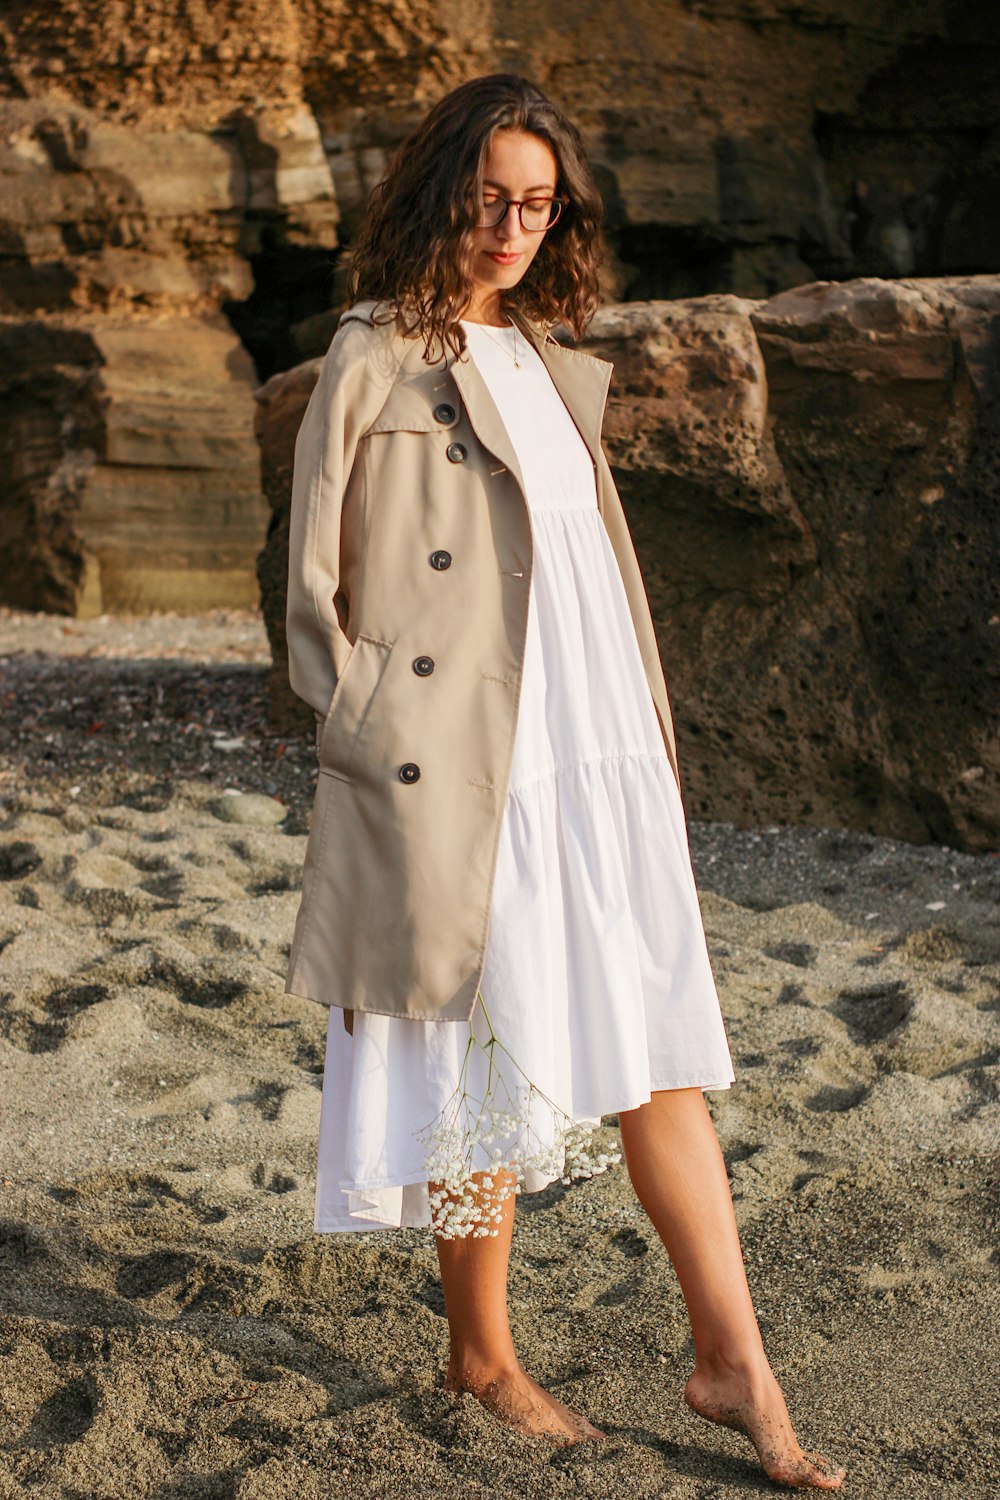 a woman in a trench coat standing on a beach